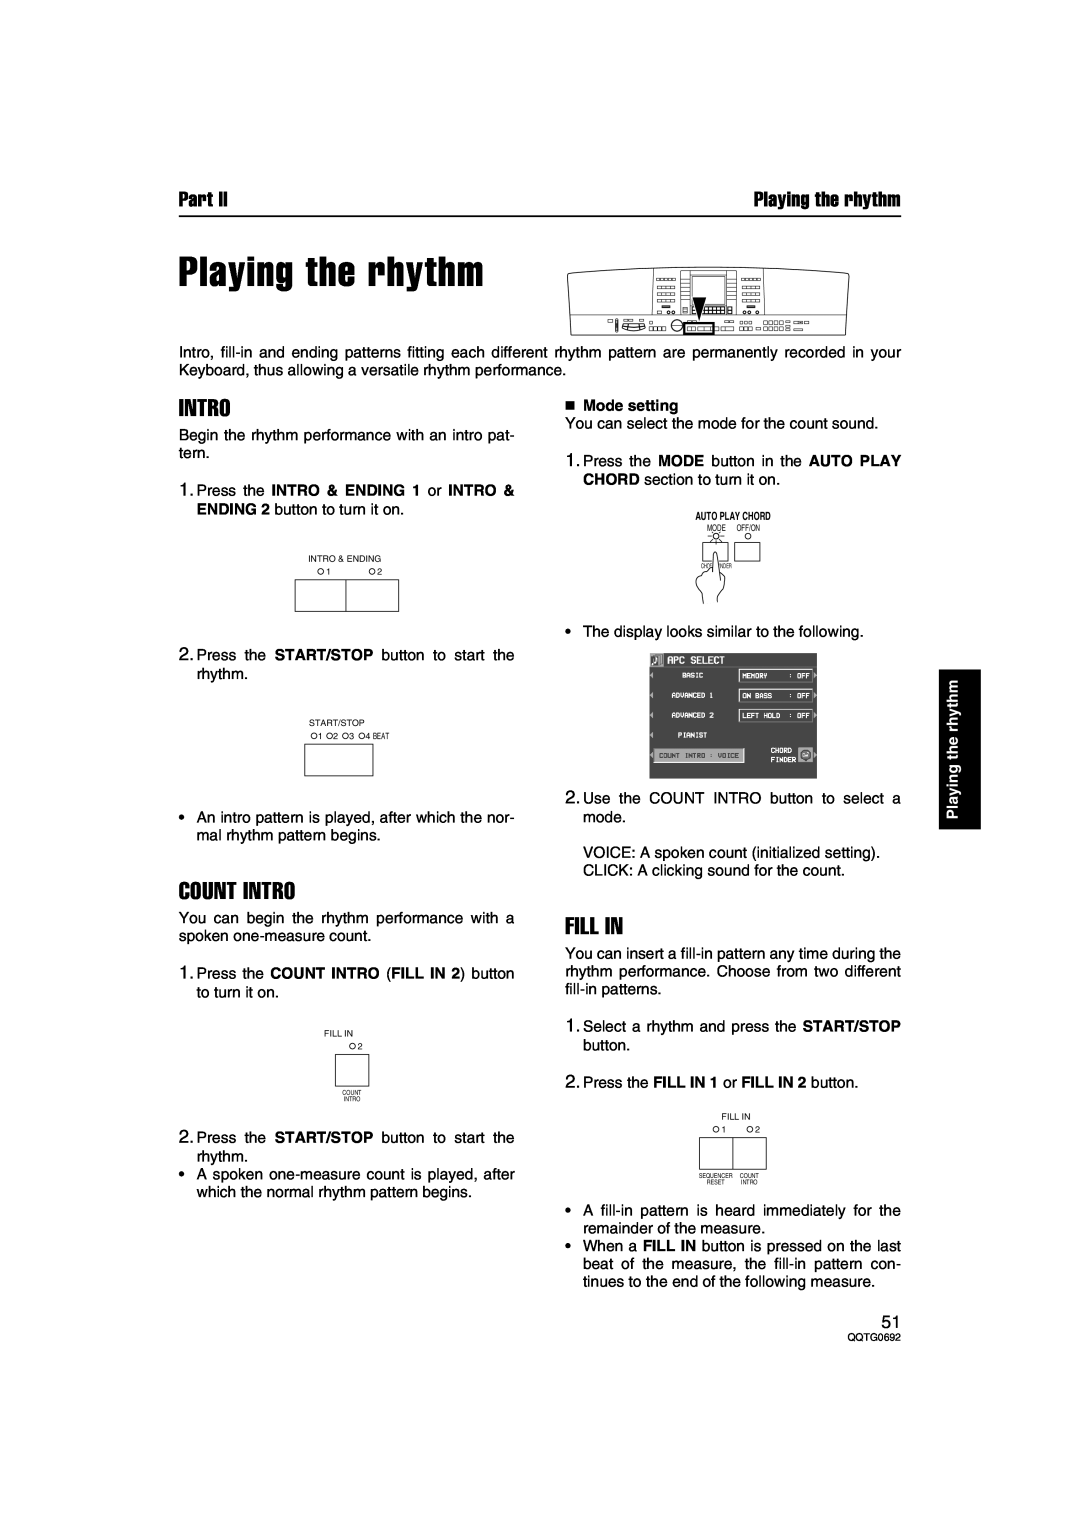 Panasonic SX-KN2400, SX-KN2600 manual Playing the rhythm, Count Intro, Fill In, Mode setting, Part 